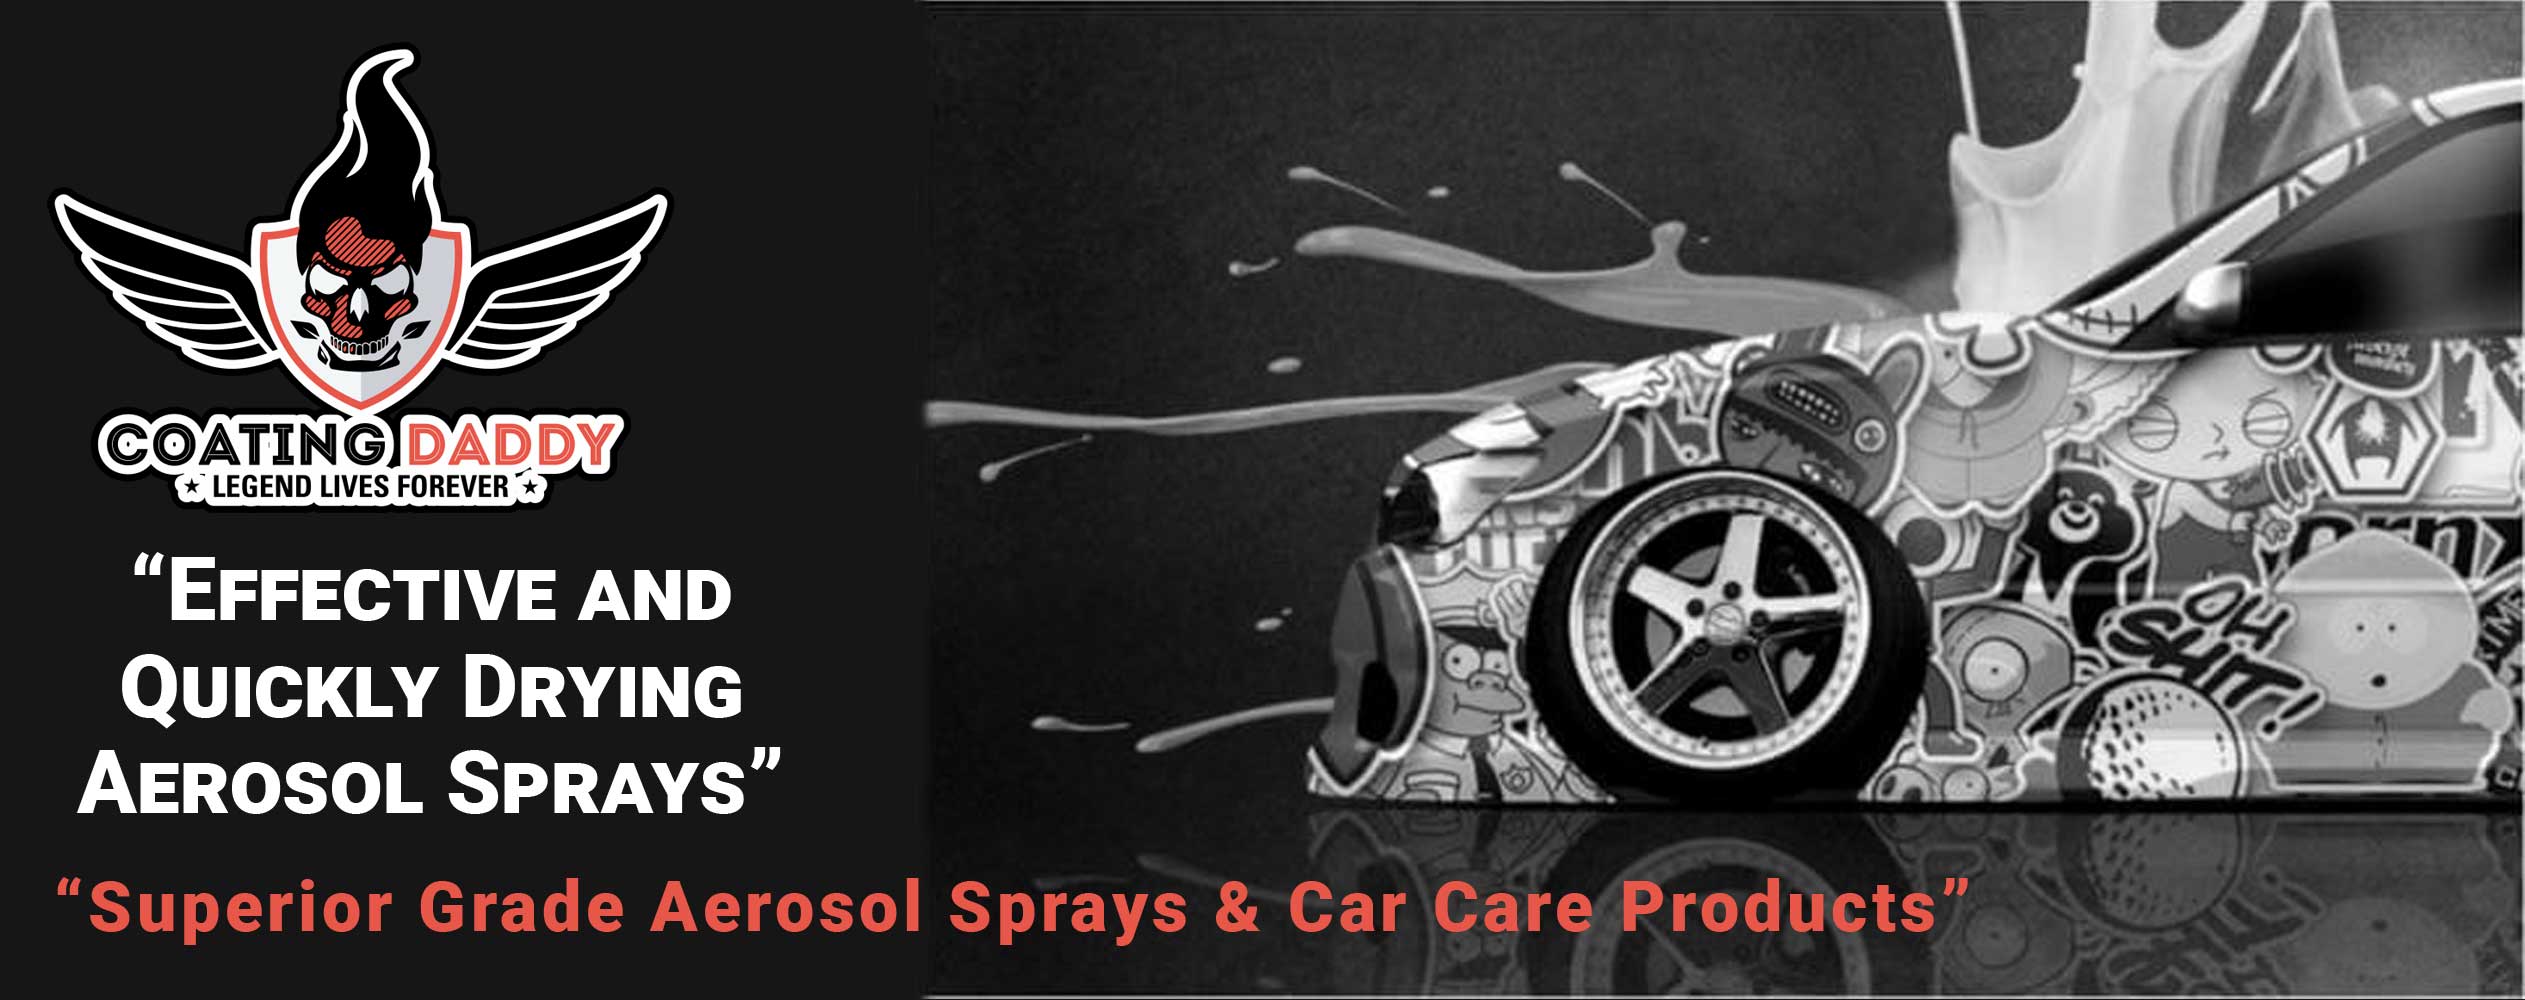 Effective And Quickly Drying Aerosol Sprays